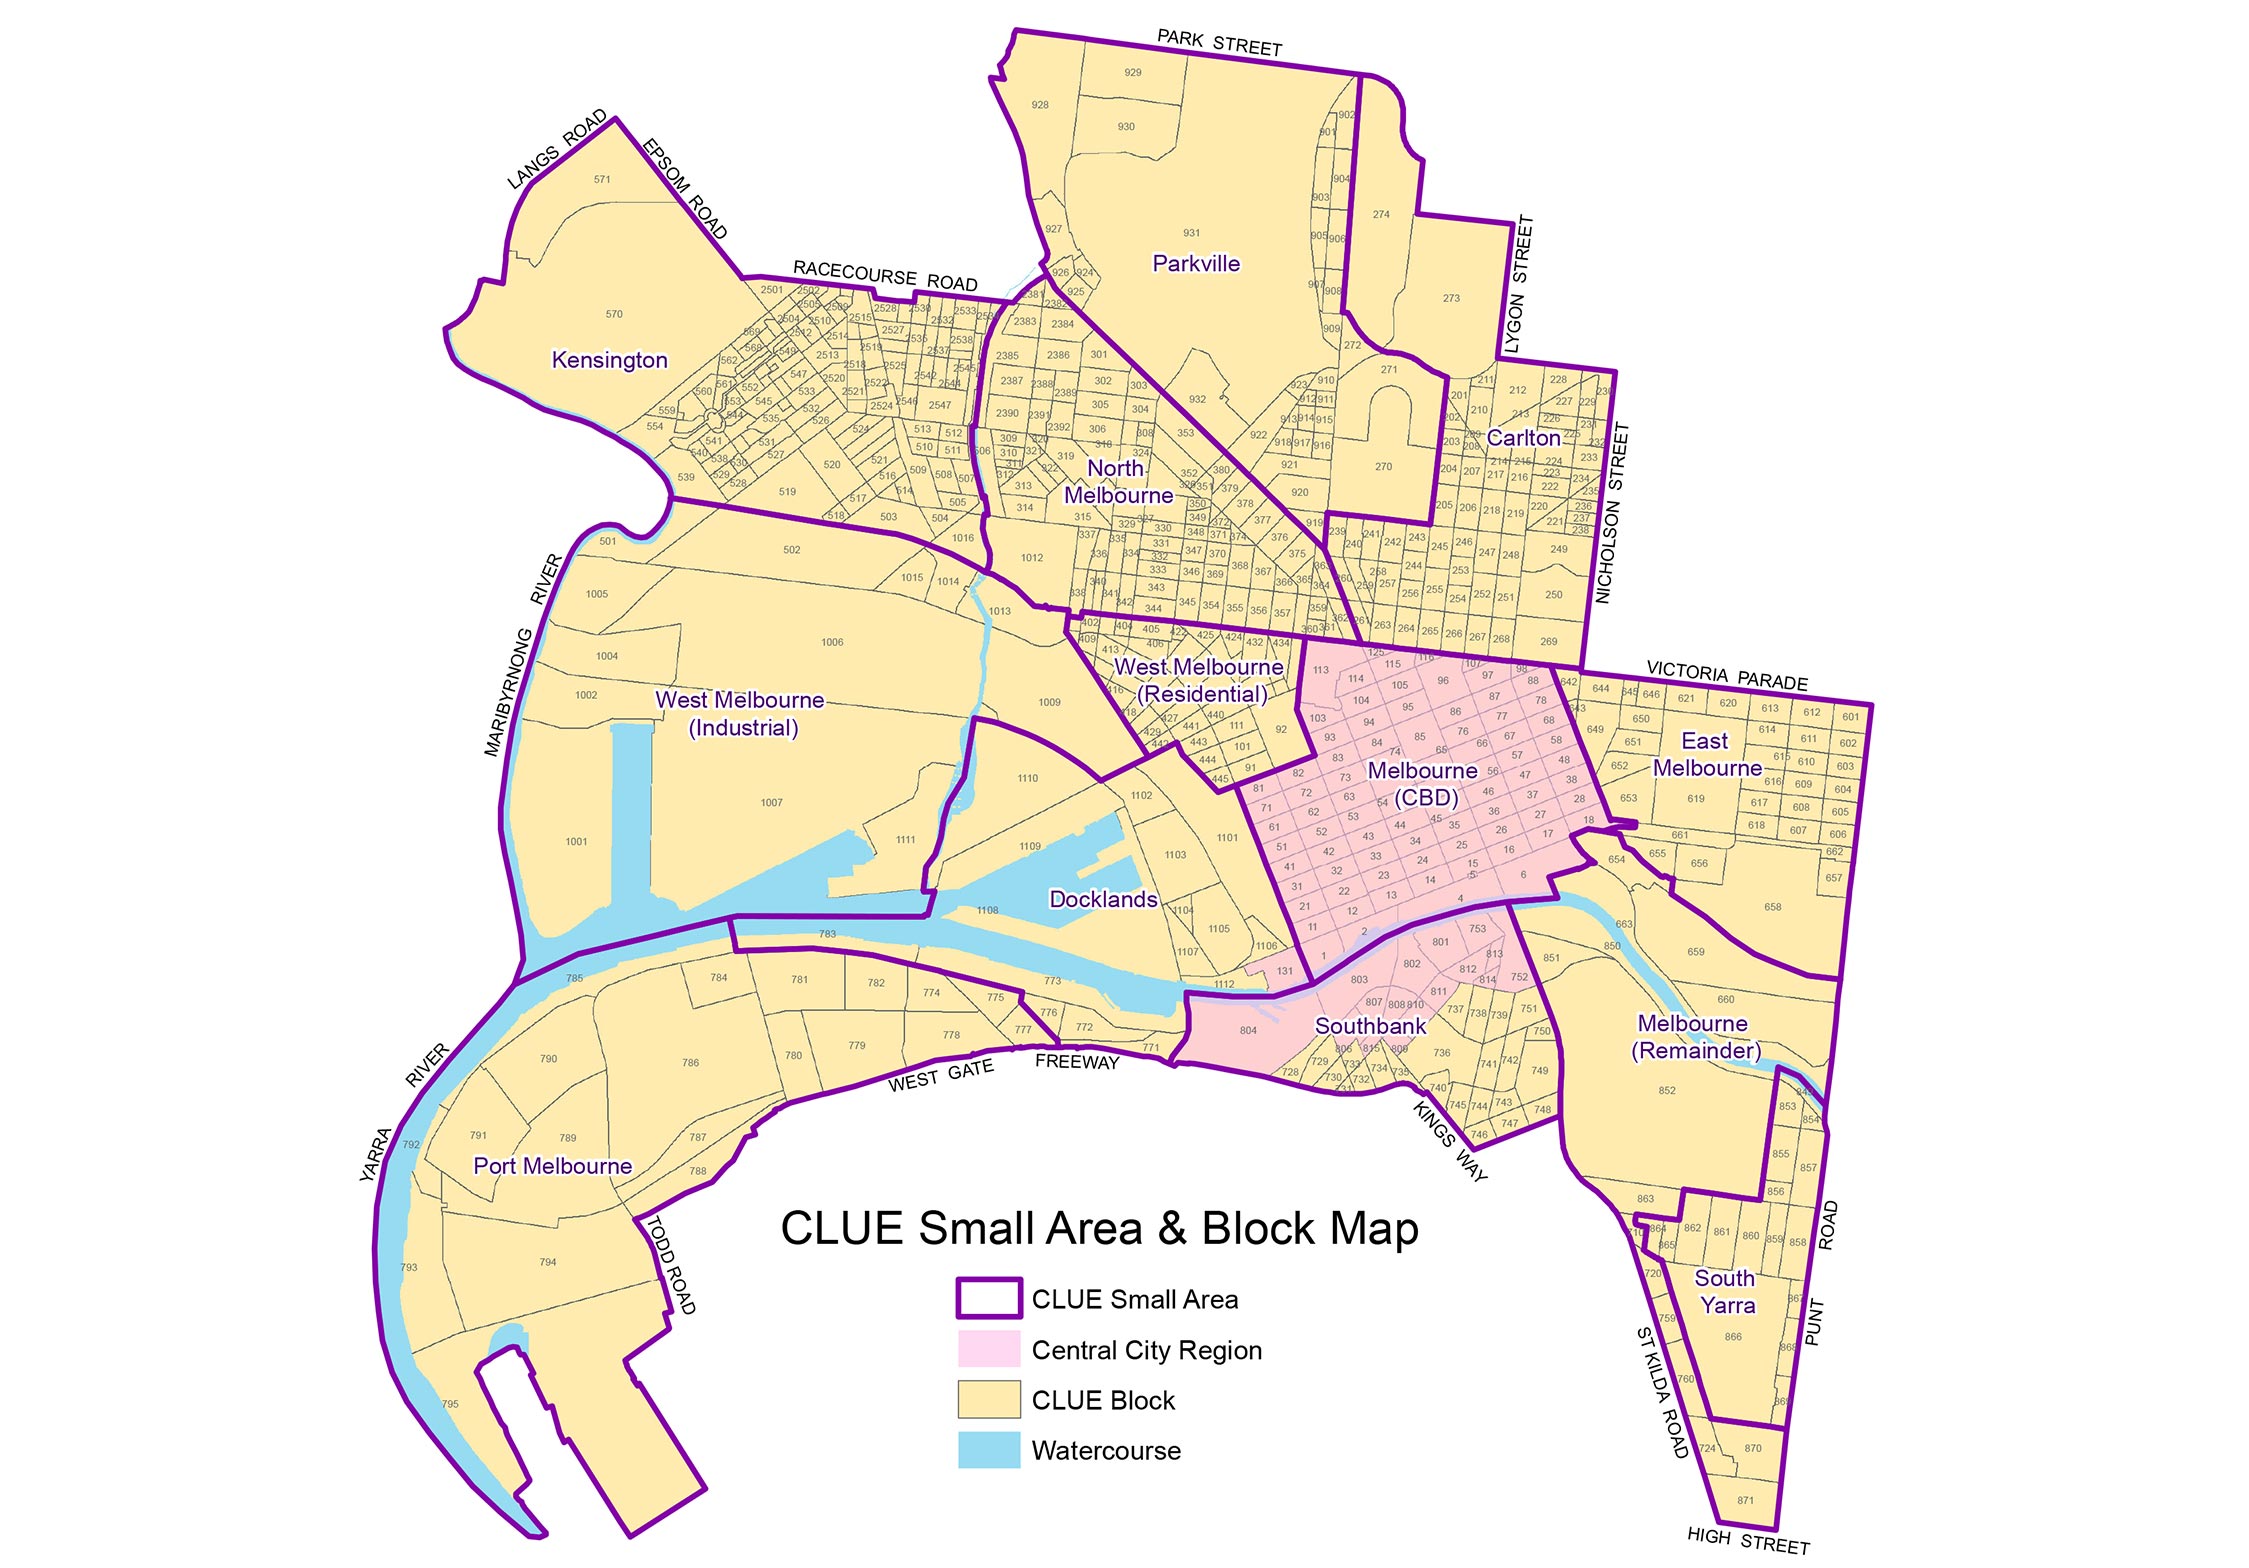 City of Melbourne map showing the numbered city blocks in CLUE small areas